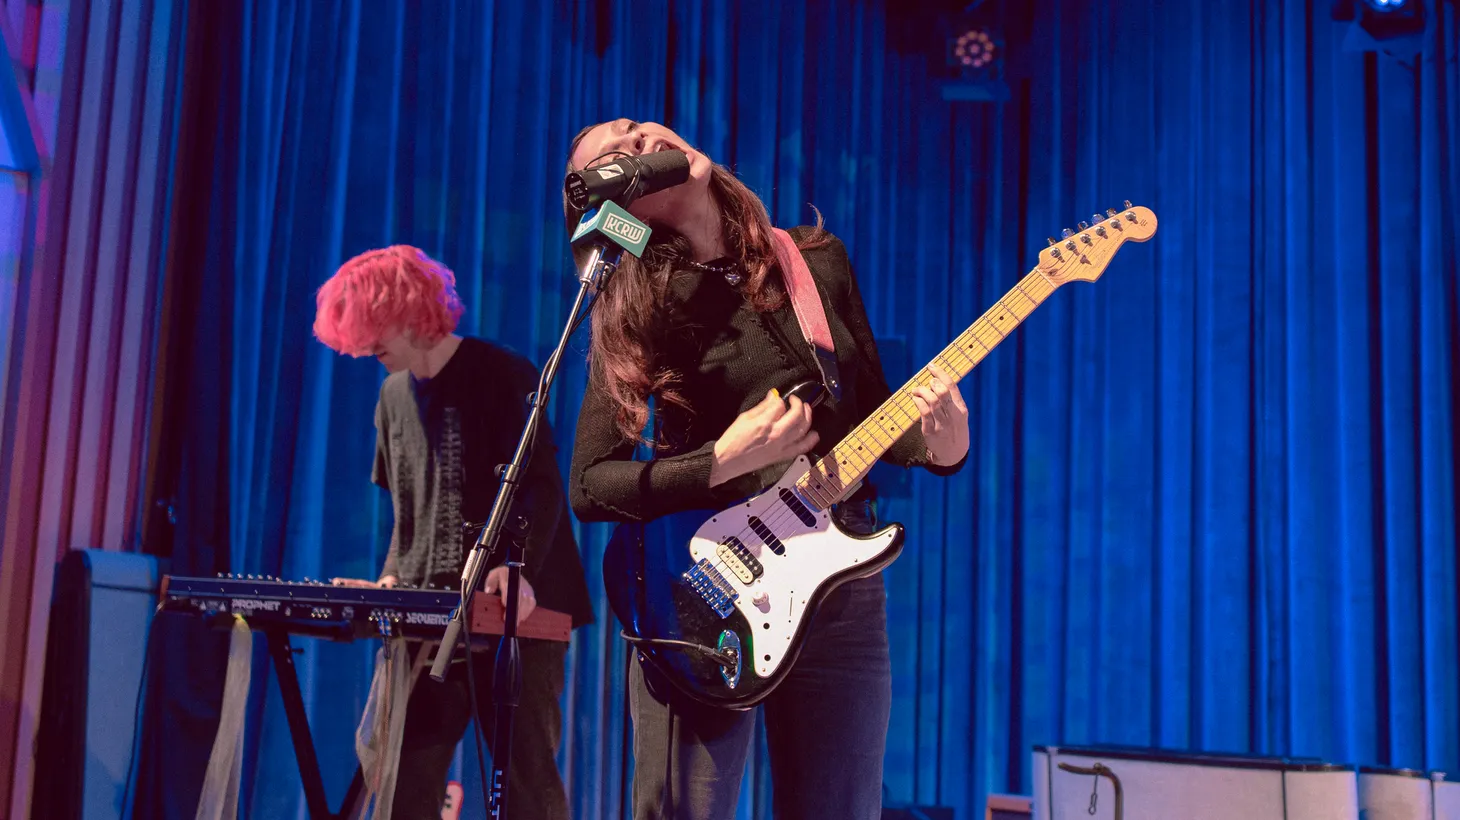 Cherry Glazerr’s performances are all-consuming.